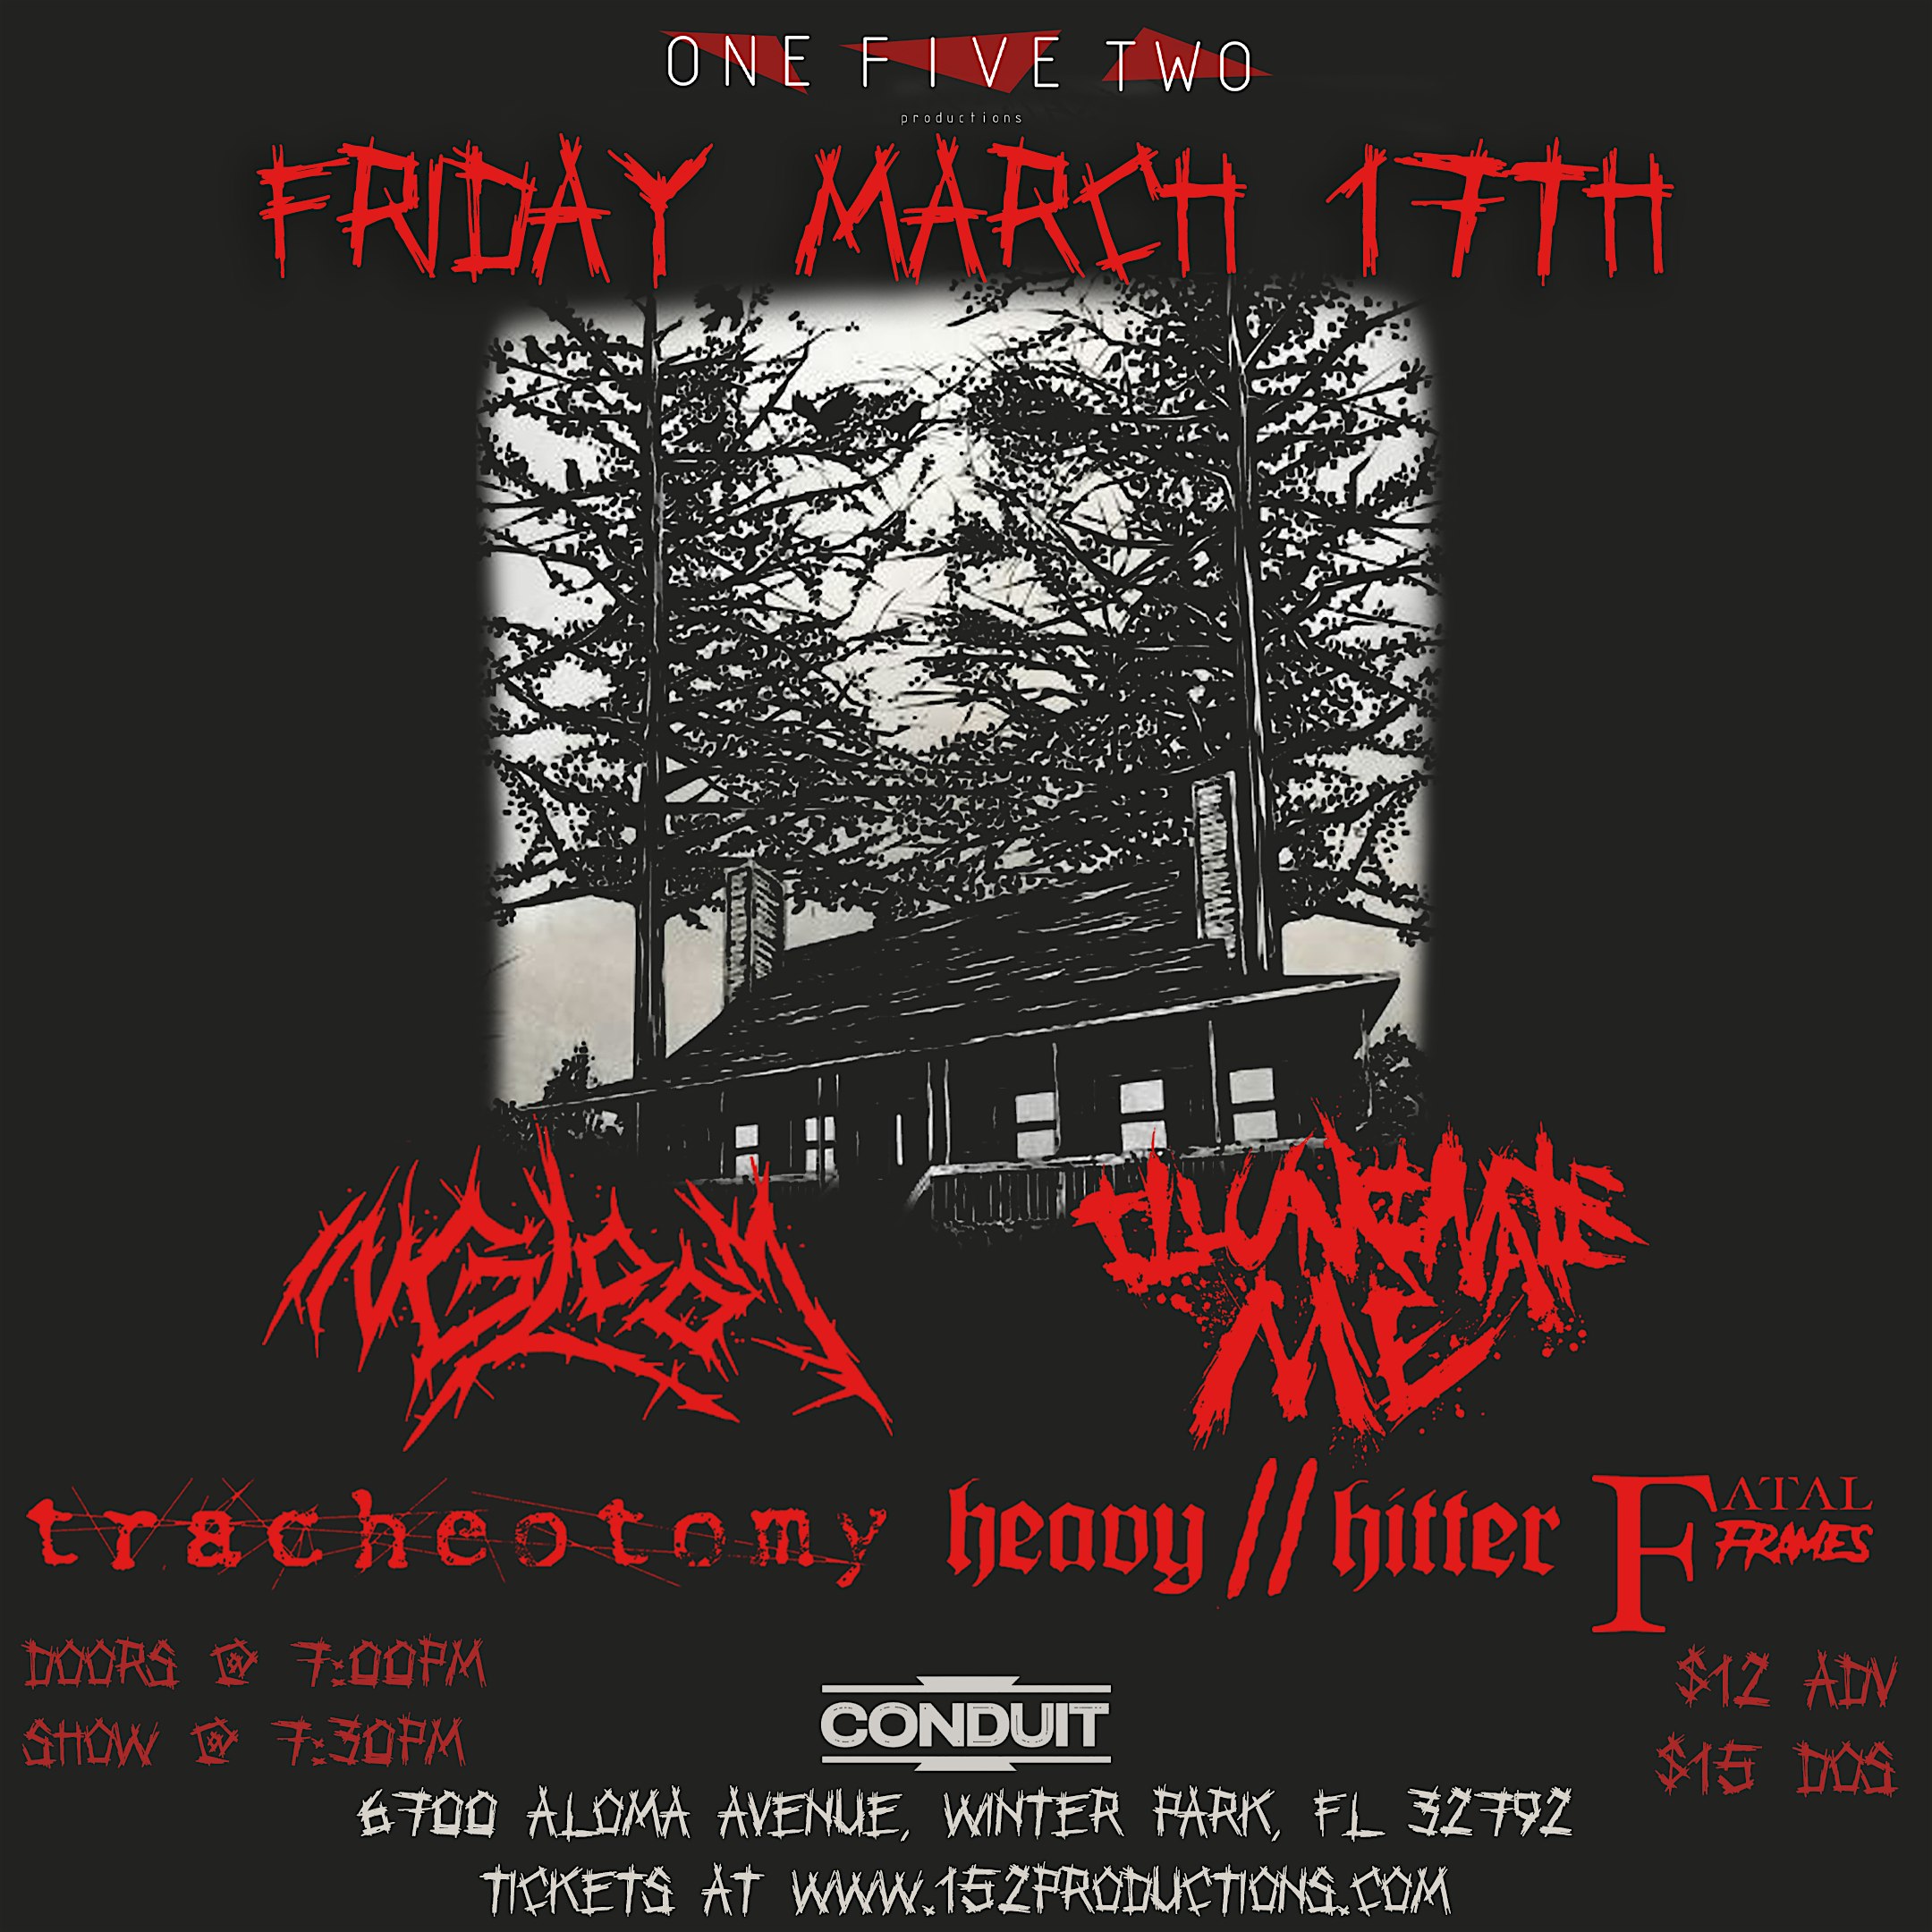 In Gloom, Illuminate Me, Tracheotomy, Heavy Hitter, and Fatal Frames in Orlando